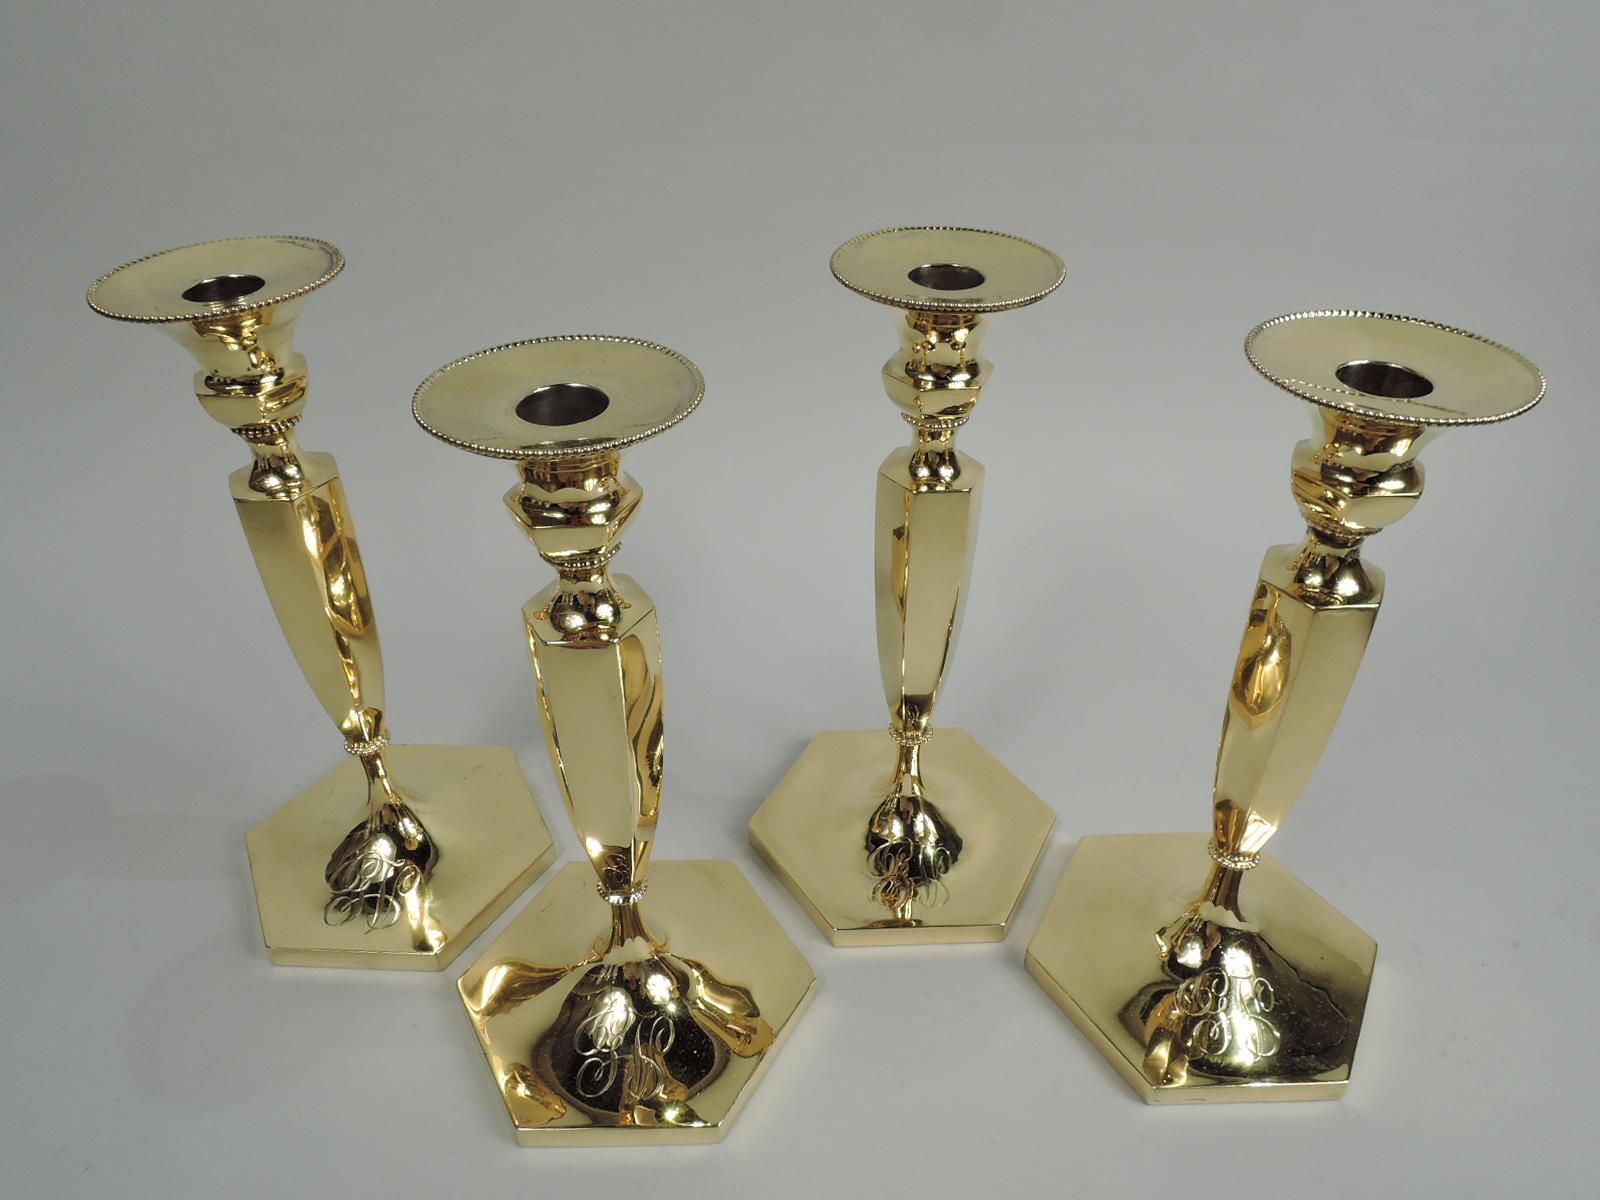 Set of 4 Sumptuous Victorian Classical gilt sterling silver candlesticks. Made by Howard & Co. in New York, ca 1894. Each: Bellied socket with detachable bobeche on spool support on tapering shaft on raised foot. Faceted. Interlaced script monogram